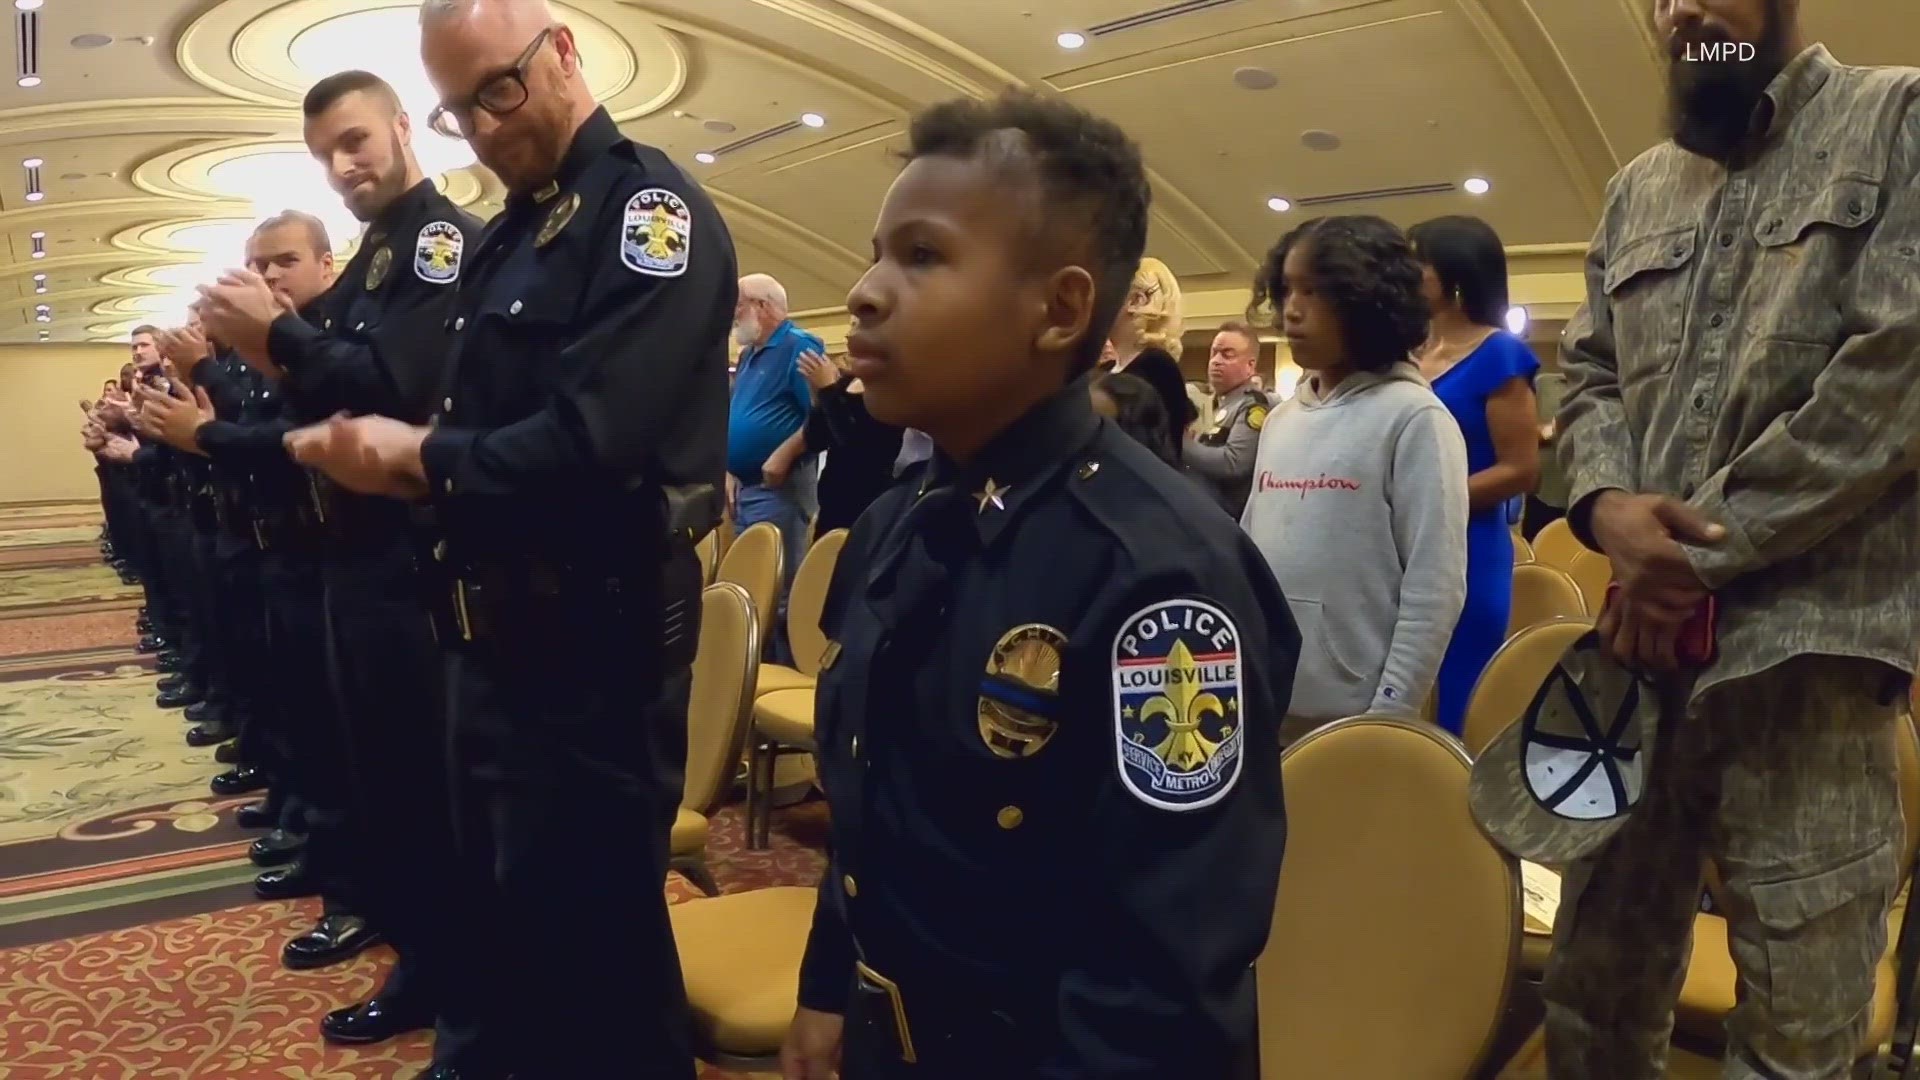 DJ Daniels, 11, is battling cancer. He's always dreamed of being a police officer, and made it his mission to be sworn in as an honorary officer at 100 agencies.